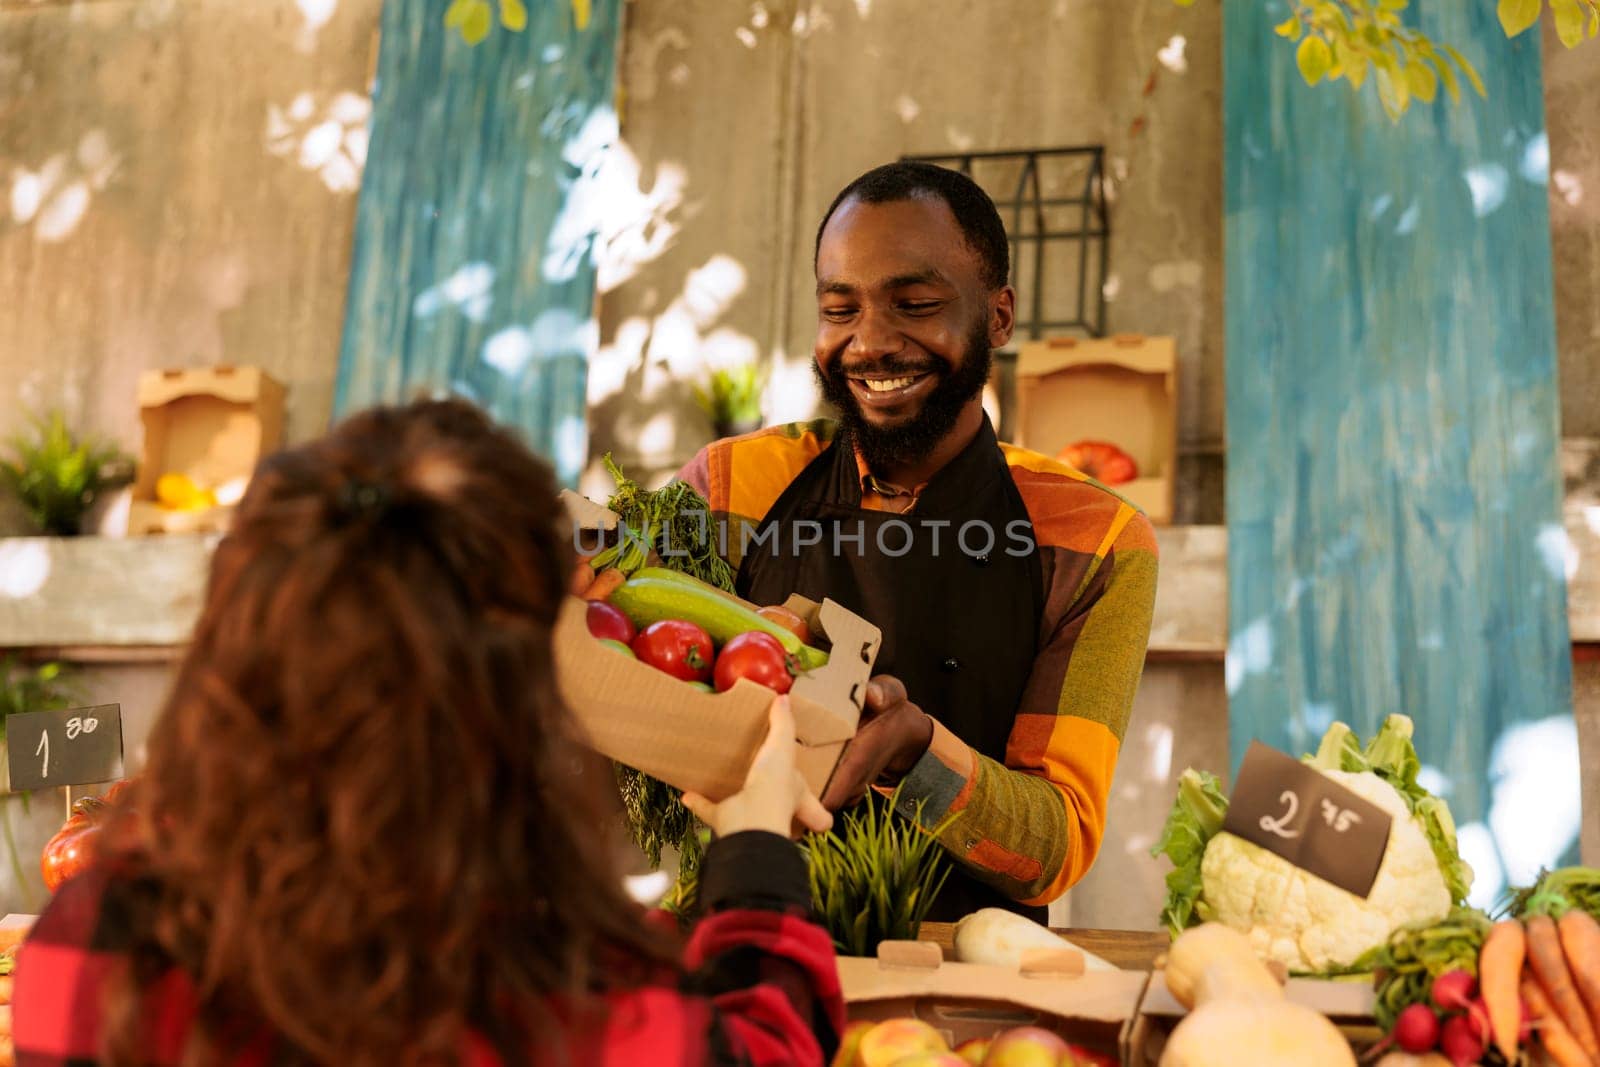 Smiling african american seller handing over variety of organic seasonal produce to caucasian female customer. Cheerful small farm business owner with apron giving box full of fresh fruits and veggies.